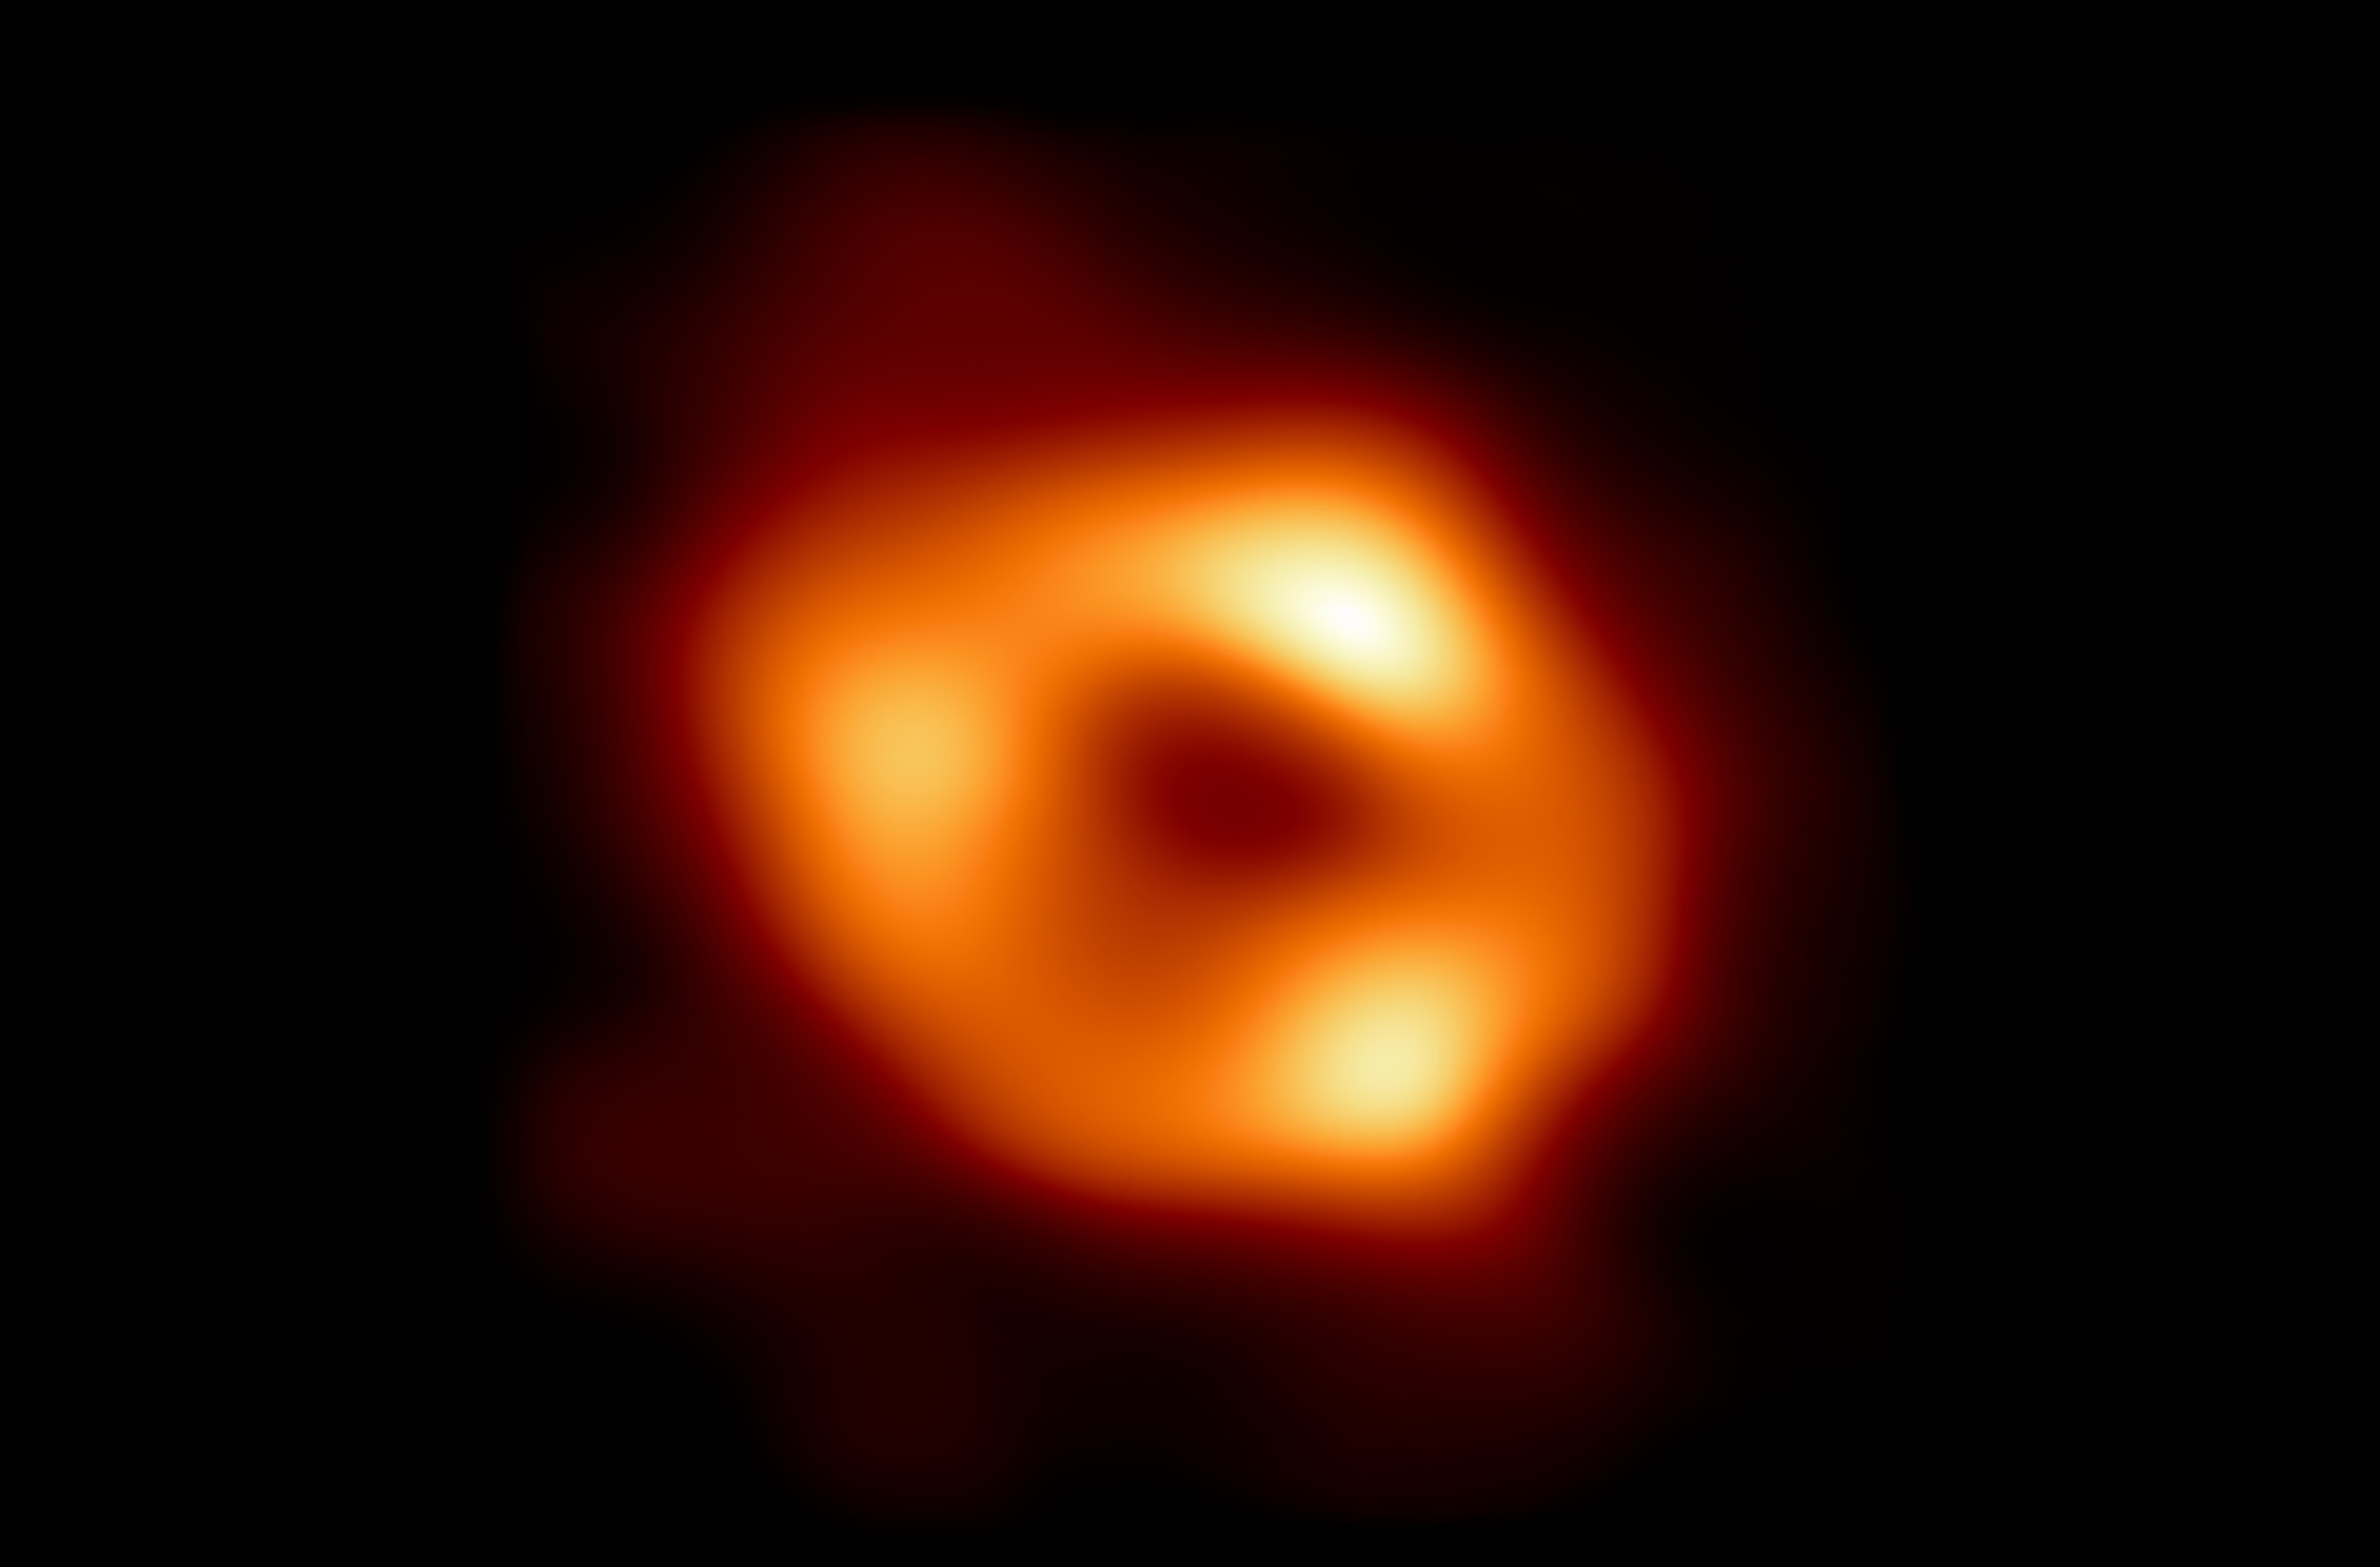 This is the first image of Sgr A*, the supermassive black hole at the centre of our galaxy.